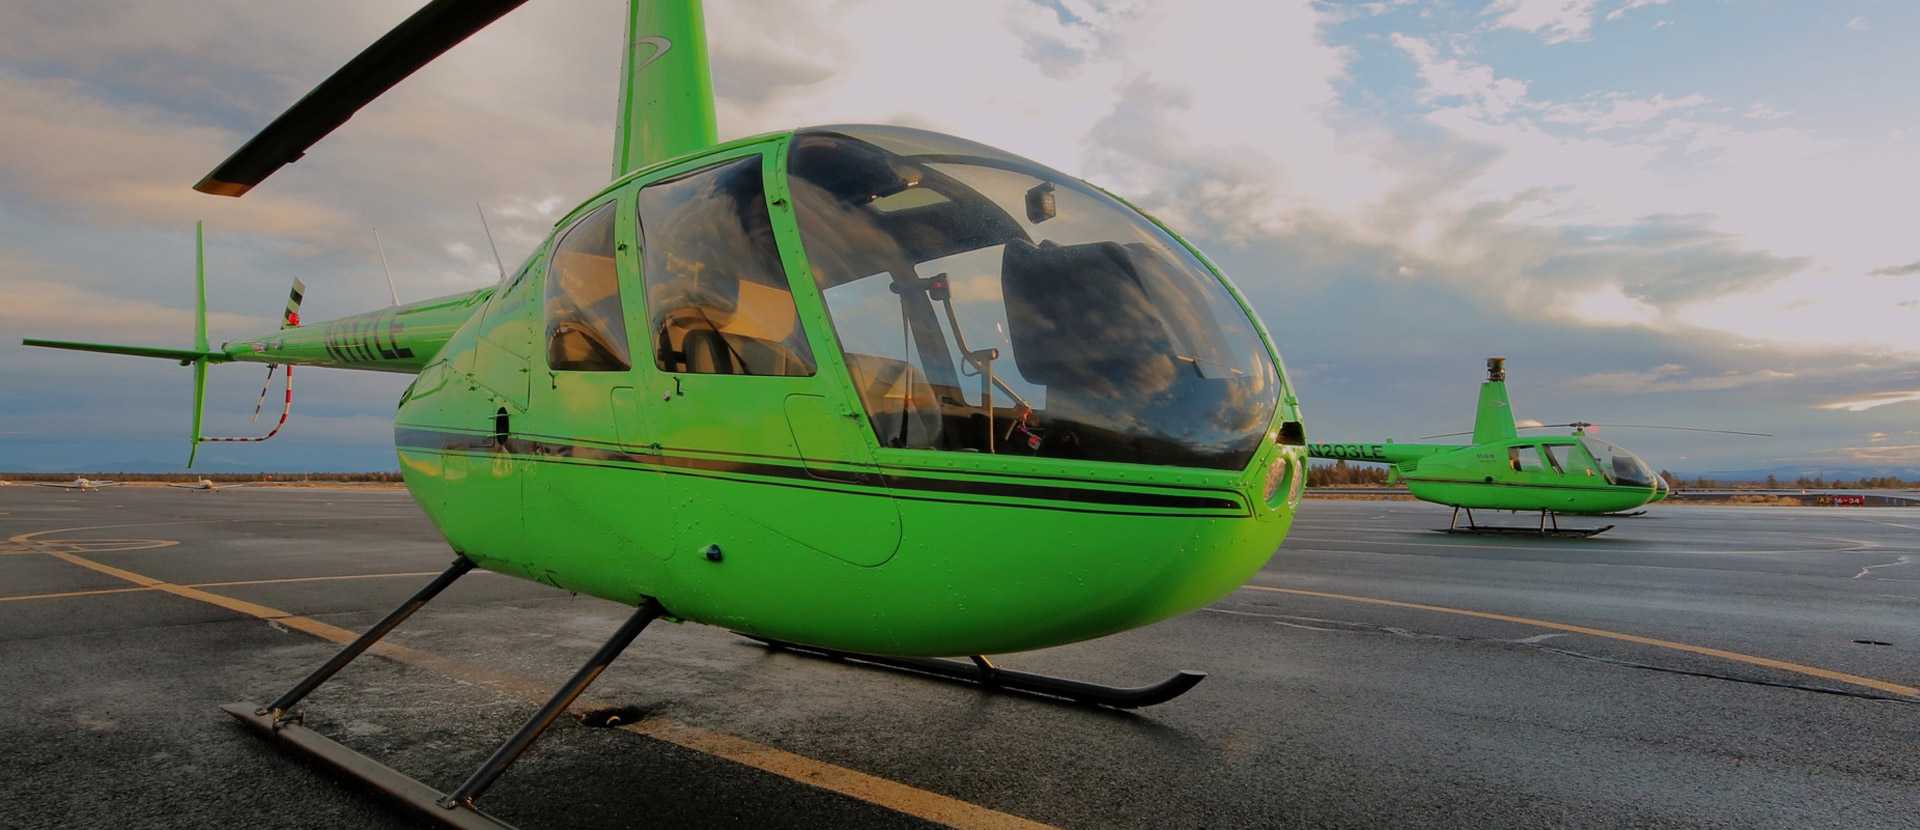 Join the Leading Edge helicopter training program